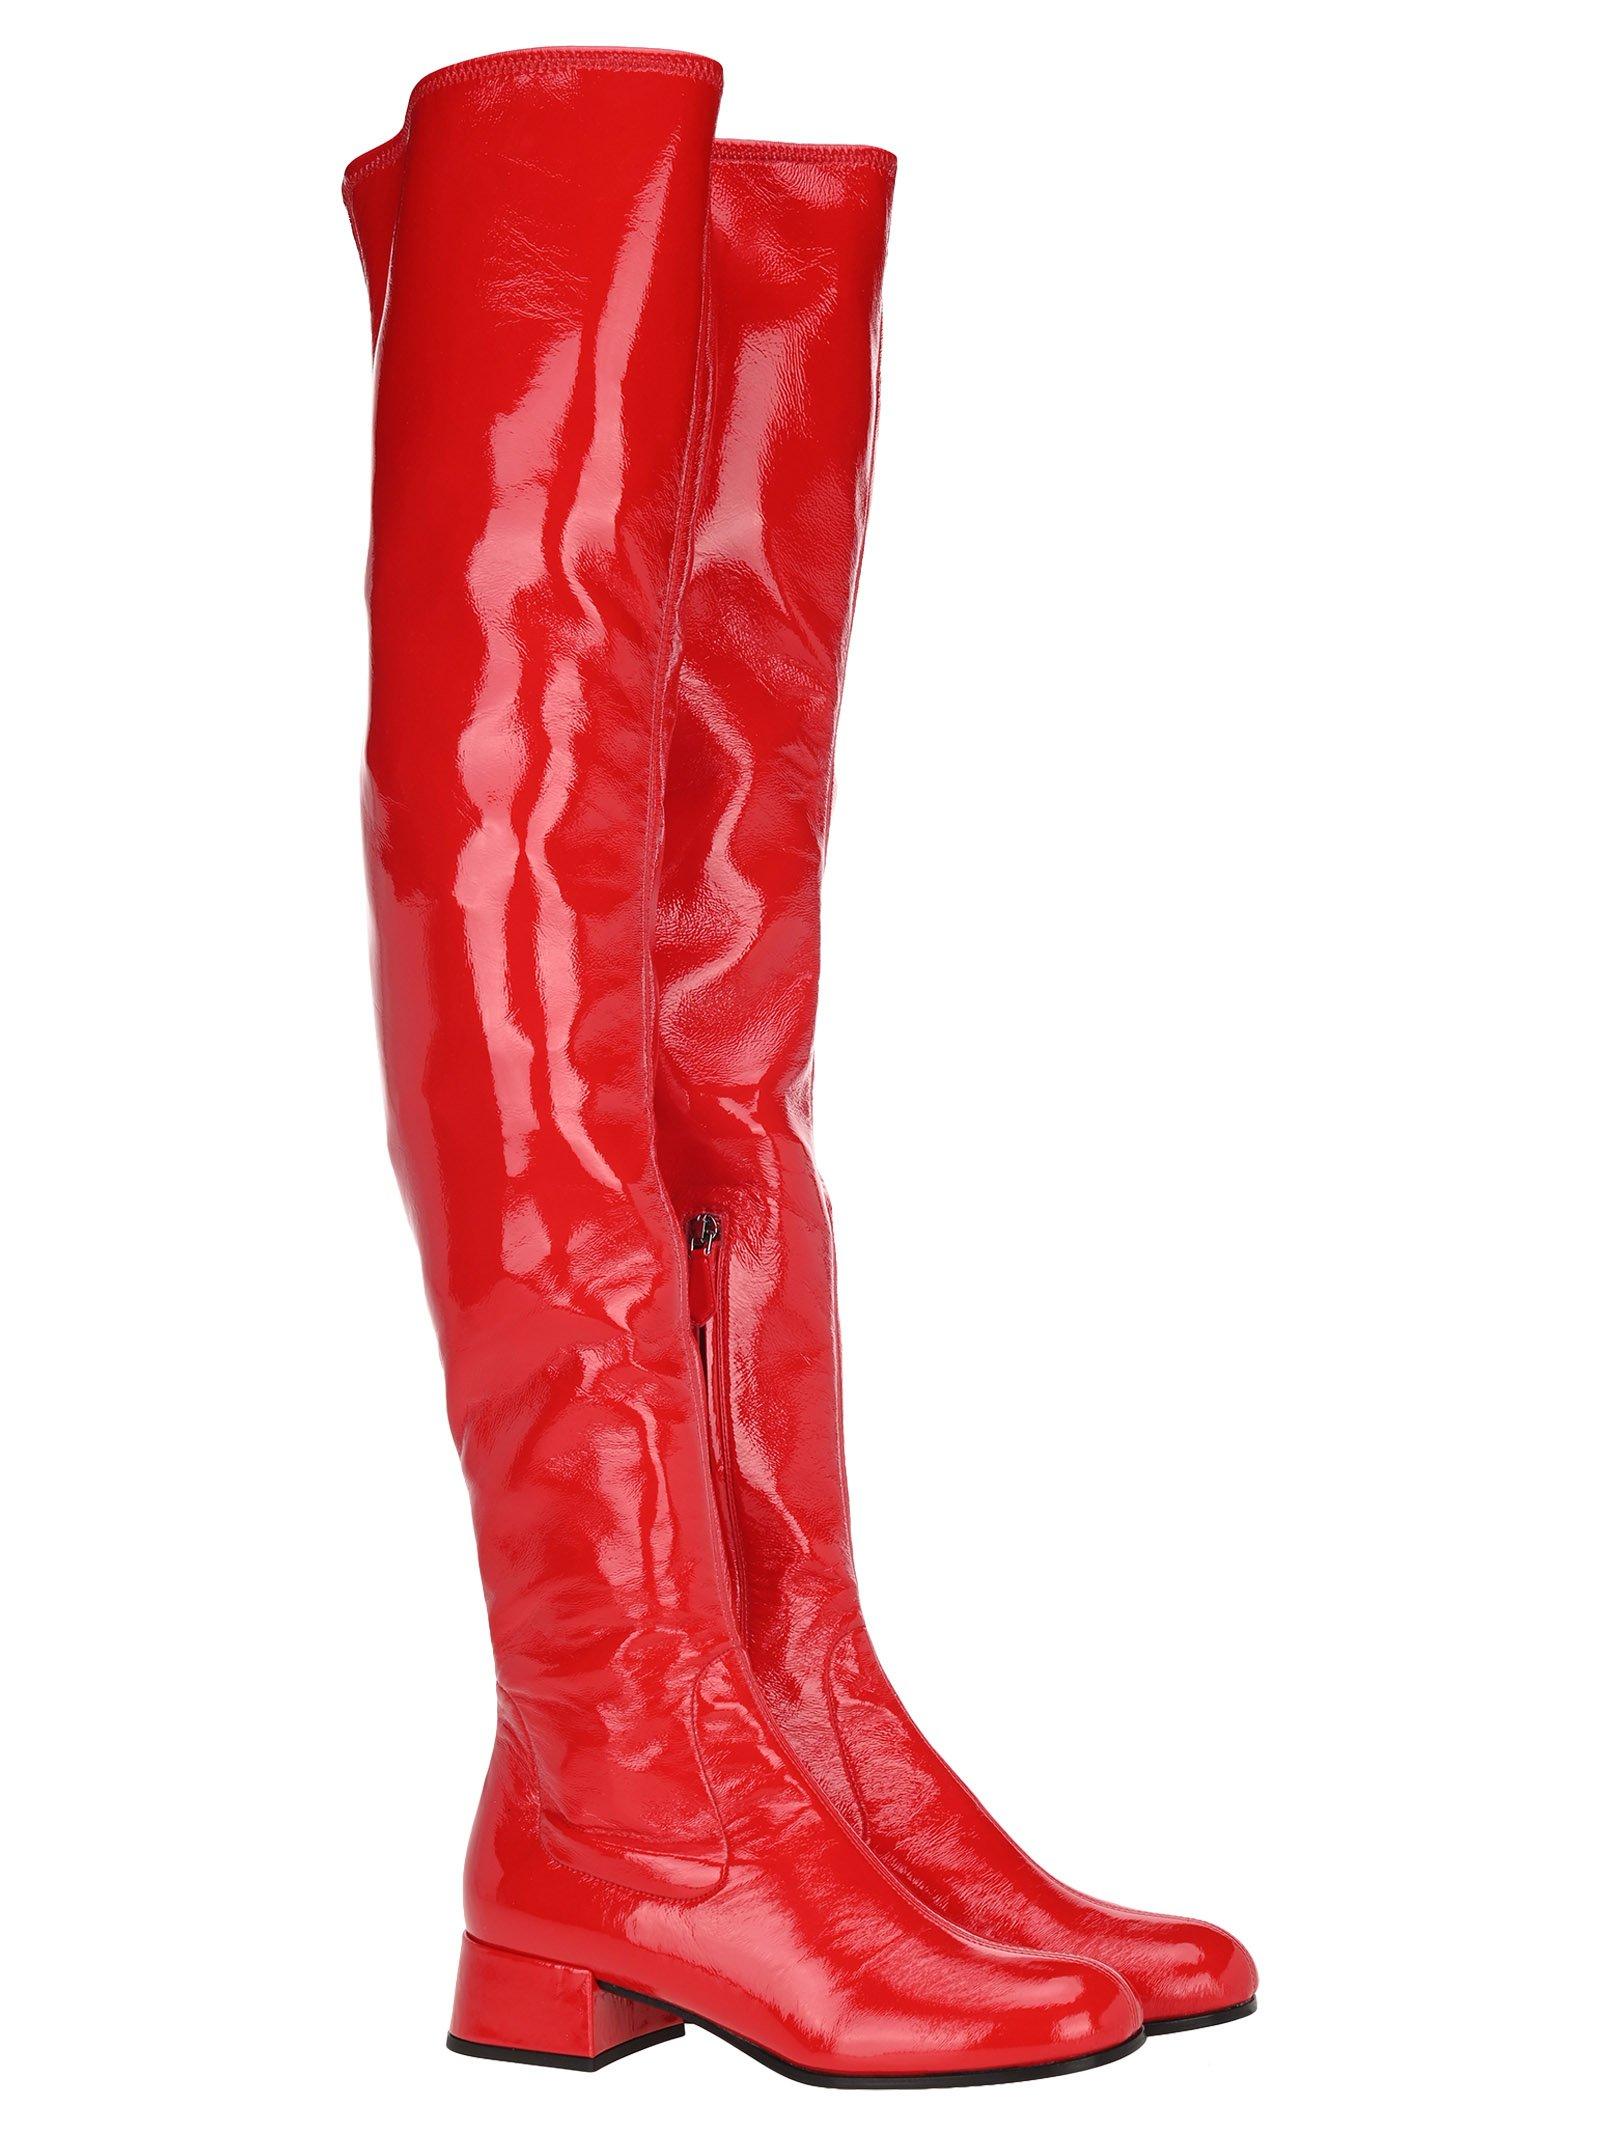 Prada Thigh High Boots in Red | Lyst